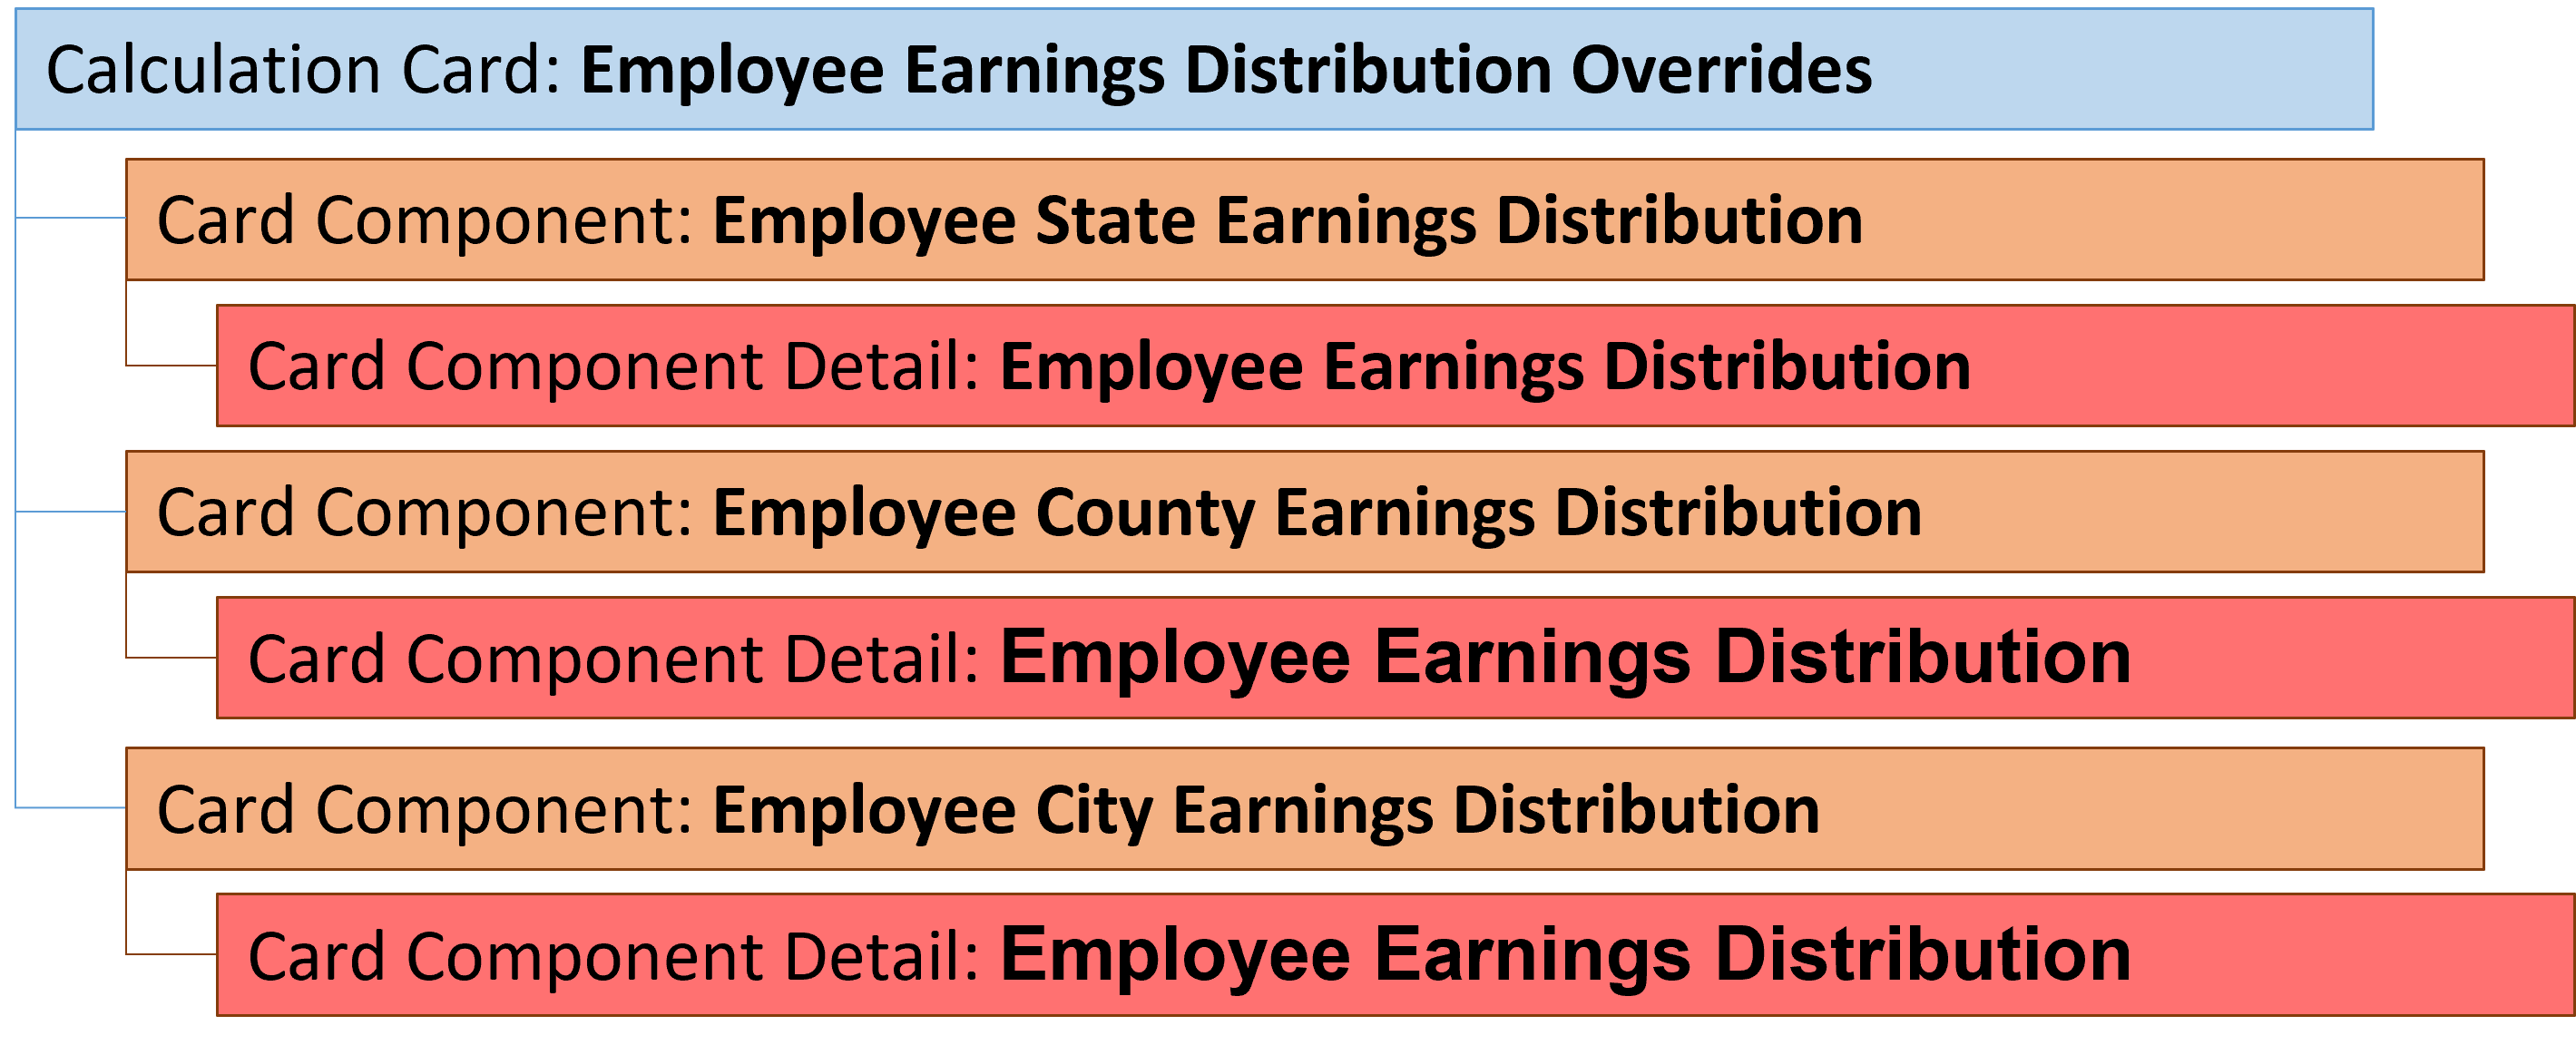 Calculation Card: Employee Earnings Distribution